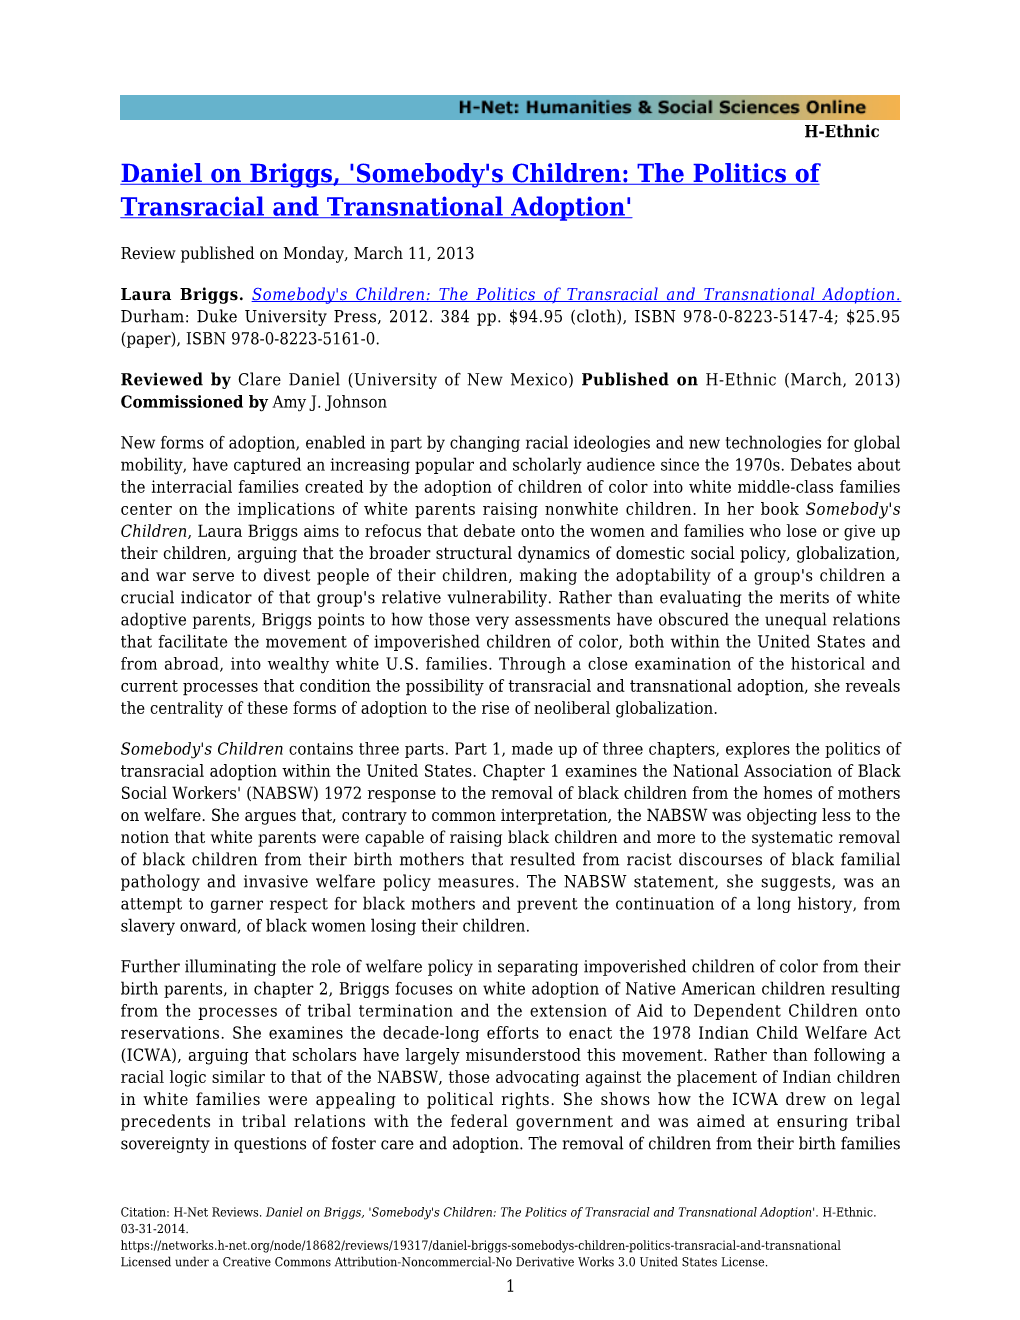 'Somebody's Children: the Politics of Transracial and Transnational Adoption'